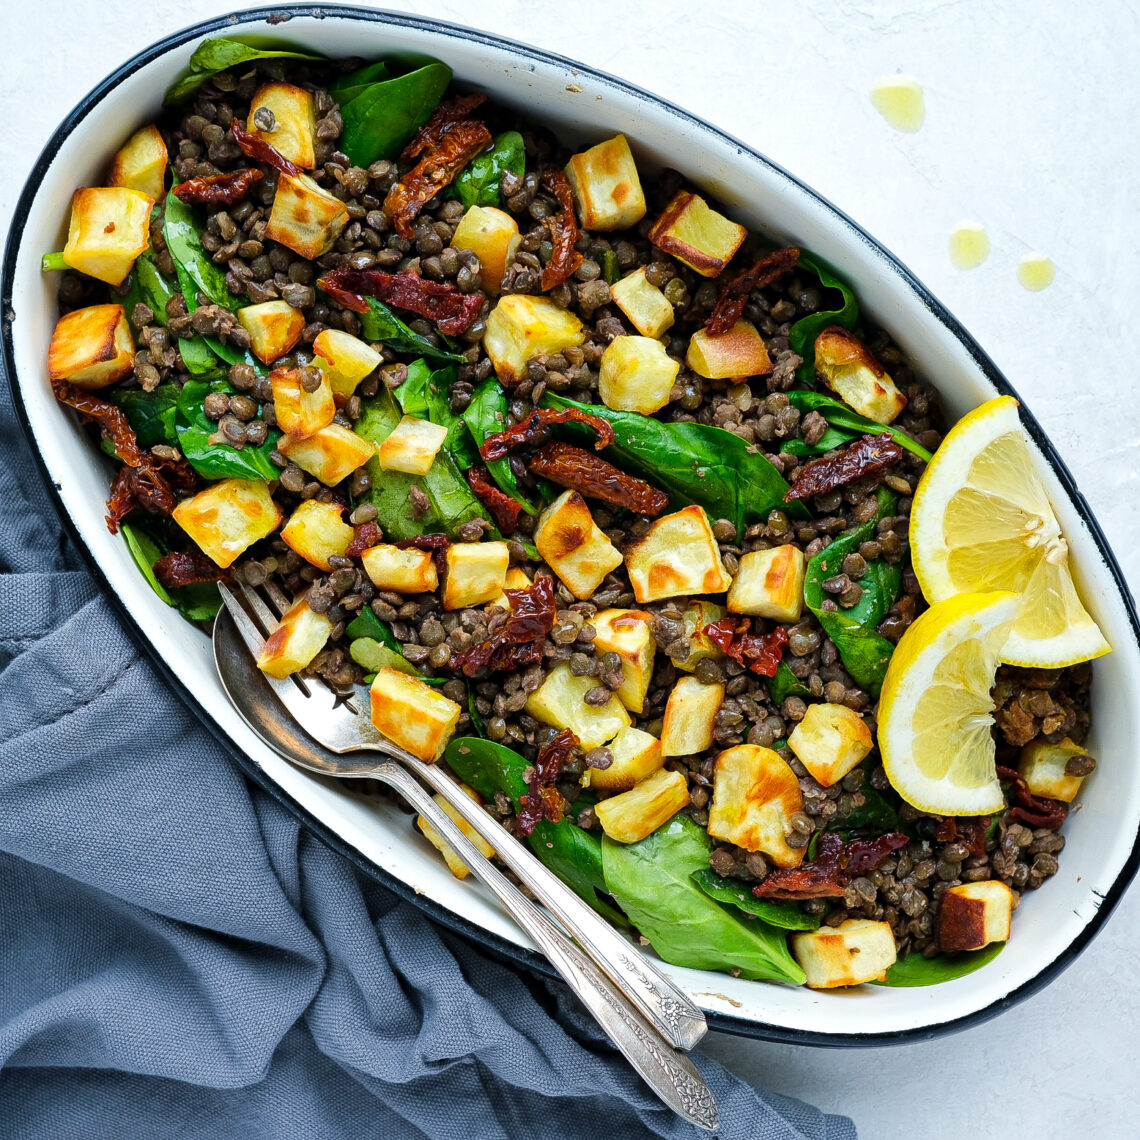 warm lentil salad with roasted sweet potatoes and sun-dried tomatoes